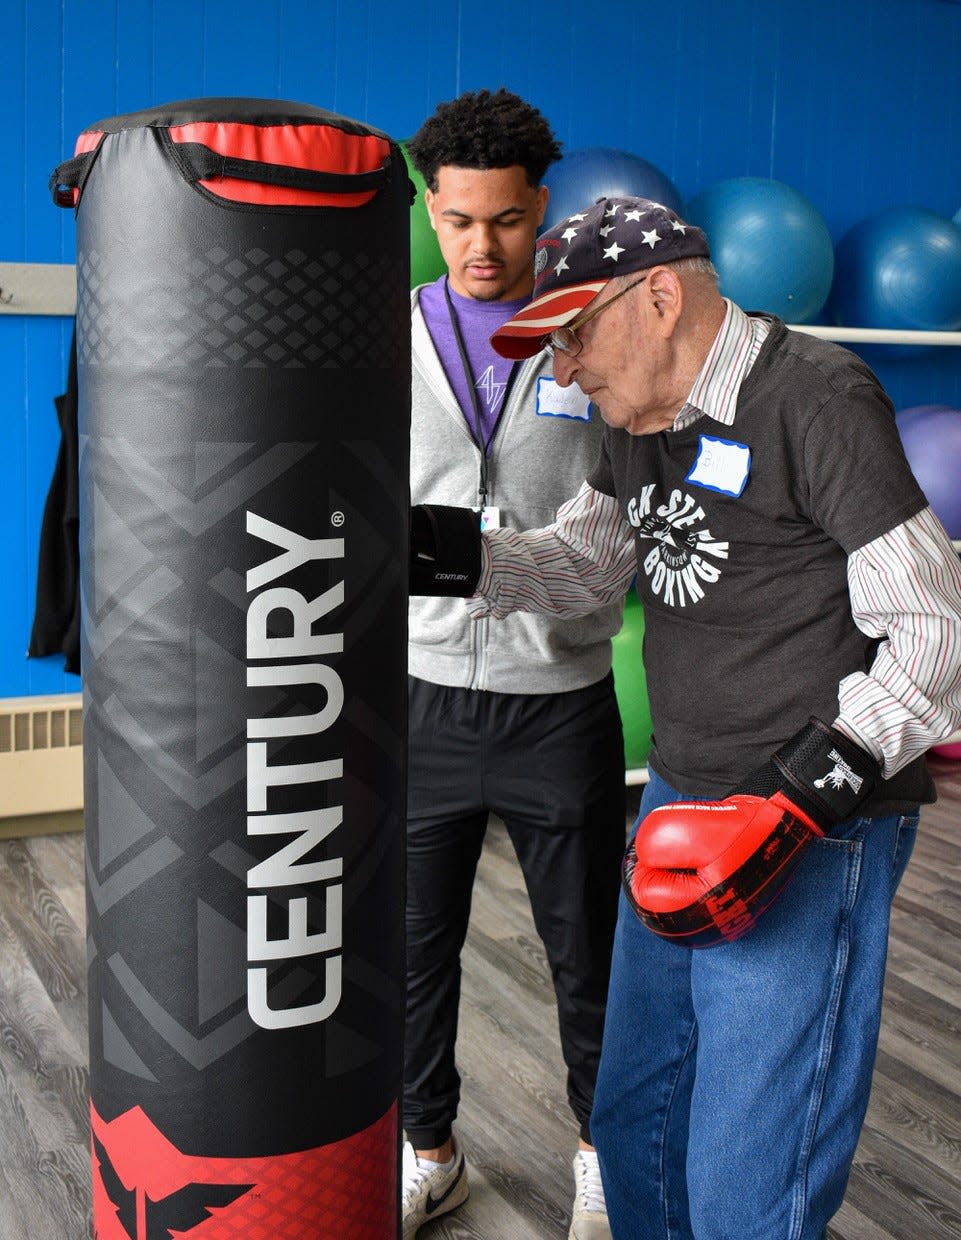 YMCA staffer Kaden Holmes assists Bill Heilman of Fremont during a Rock Steady Boxing class for people diagnosed with Parkinson’s disease.